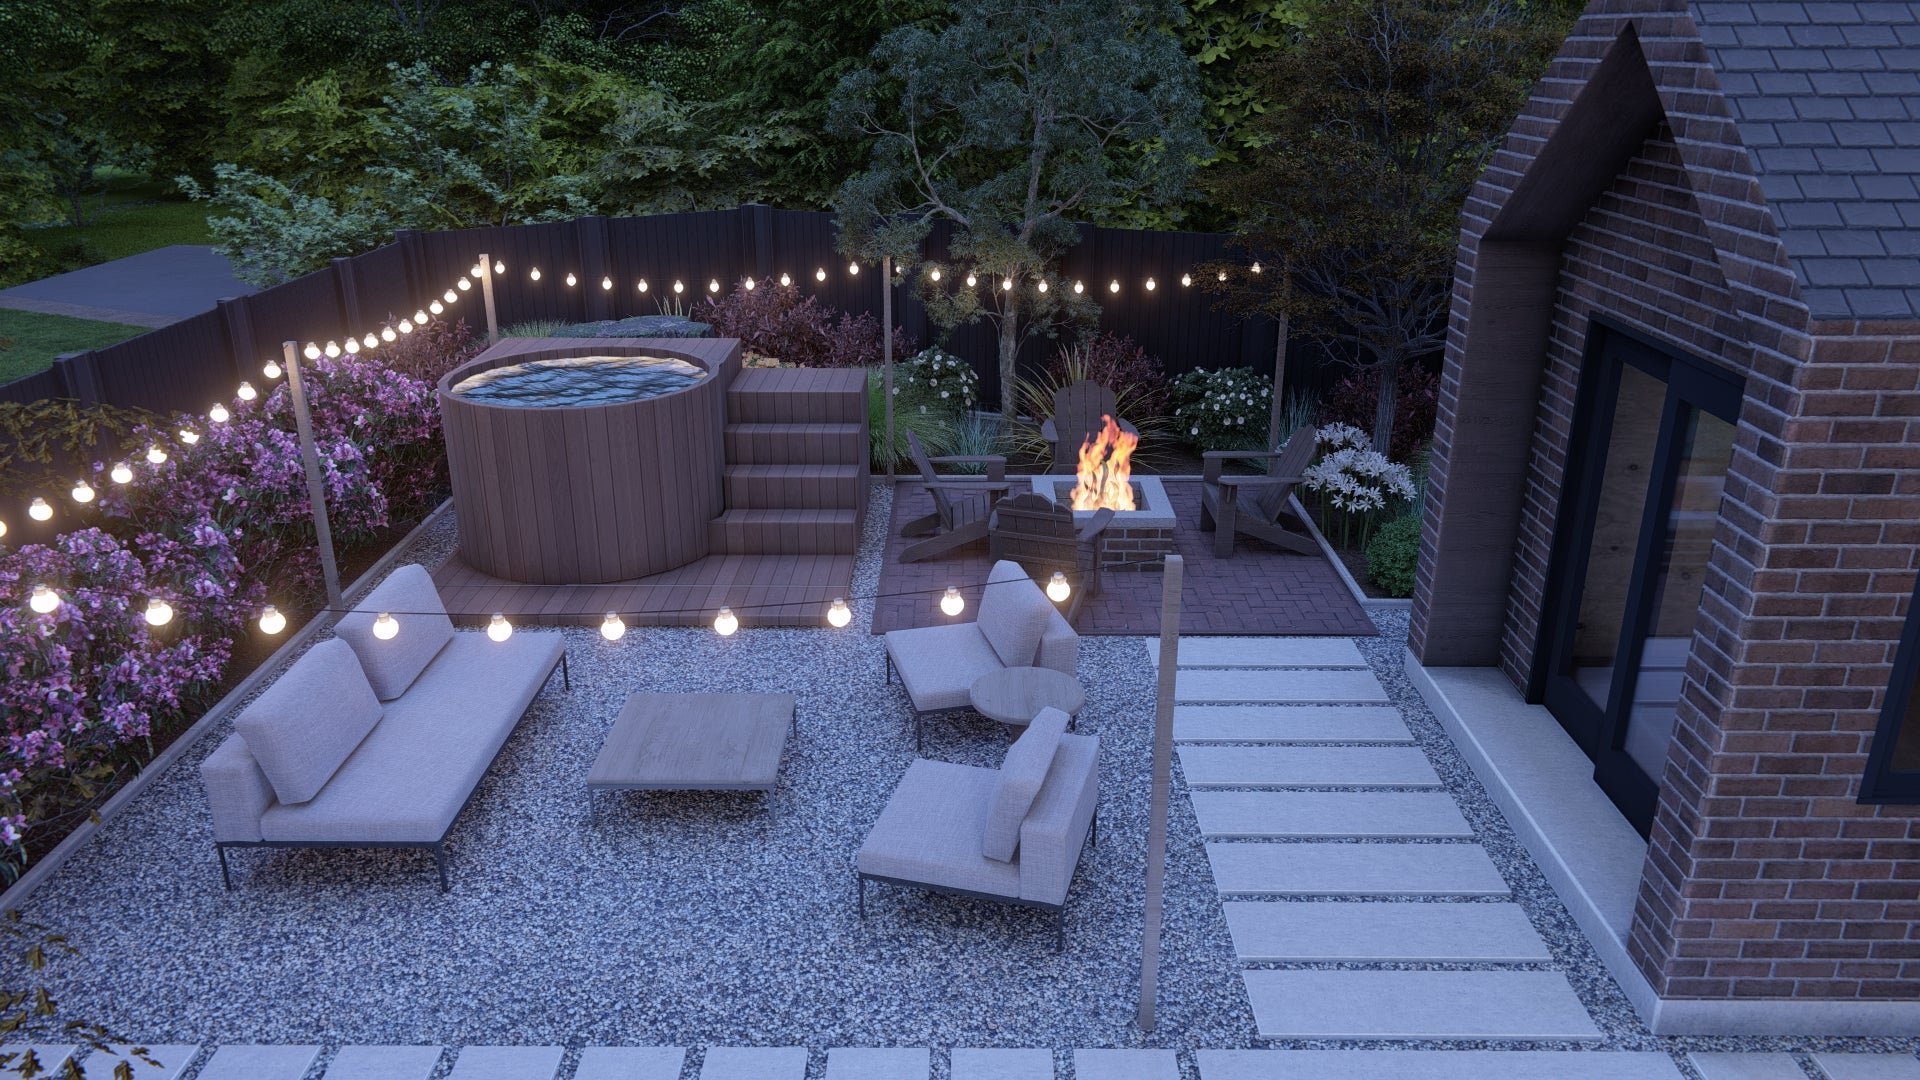 Closeup of cedar hot tub and composite decking with steps and lounge area with furniture in foreground at night lit by string lights